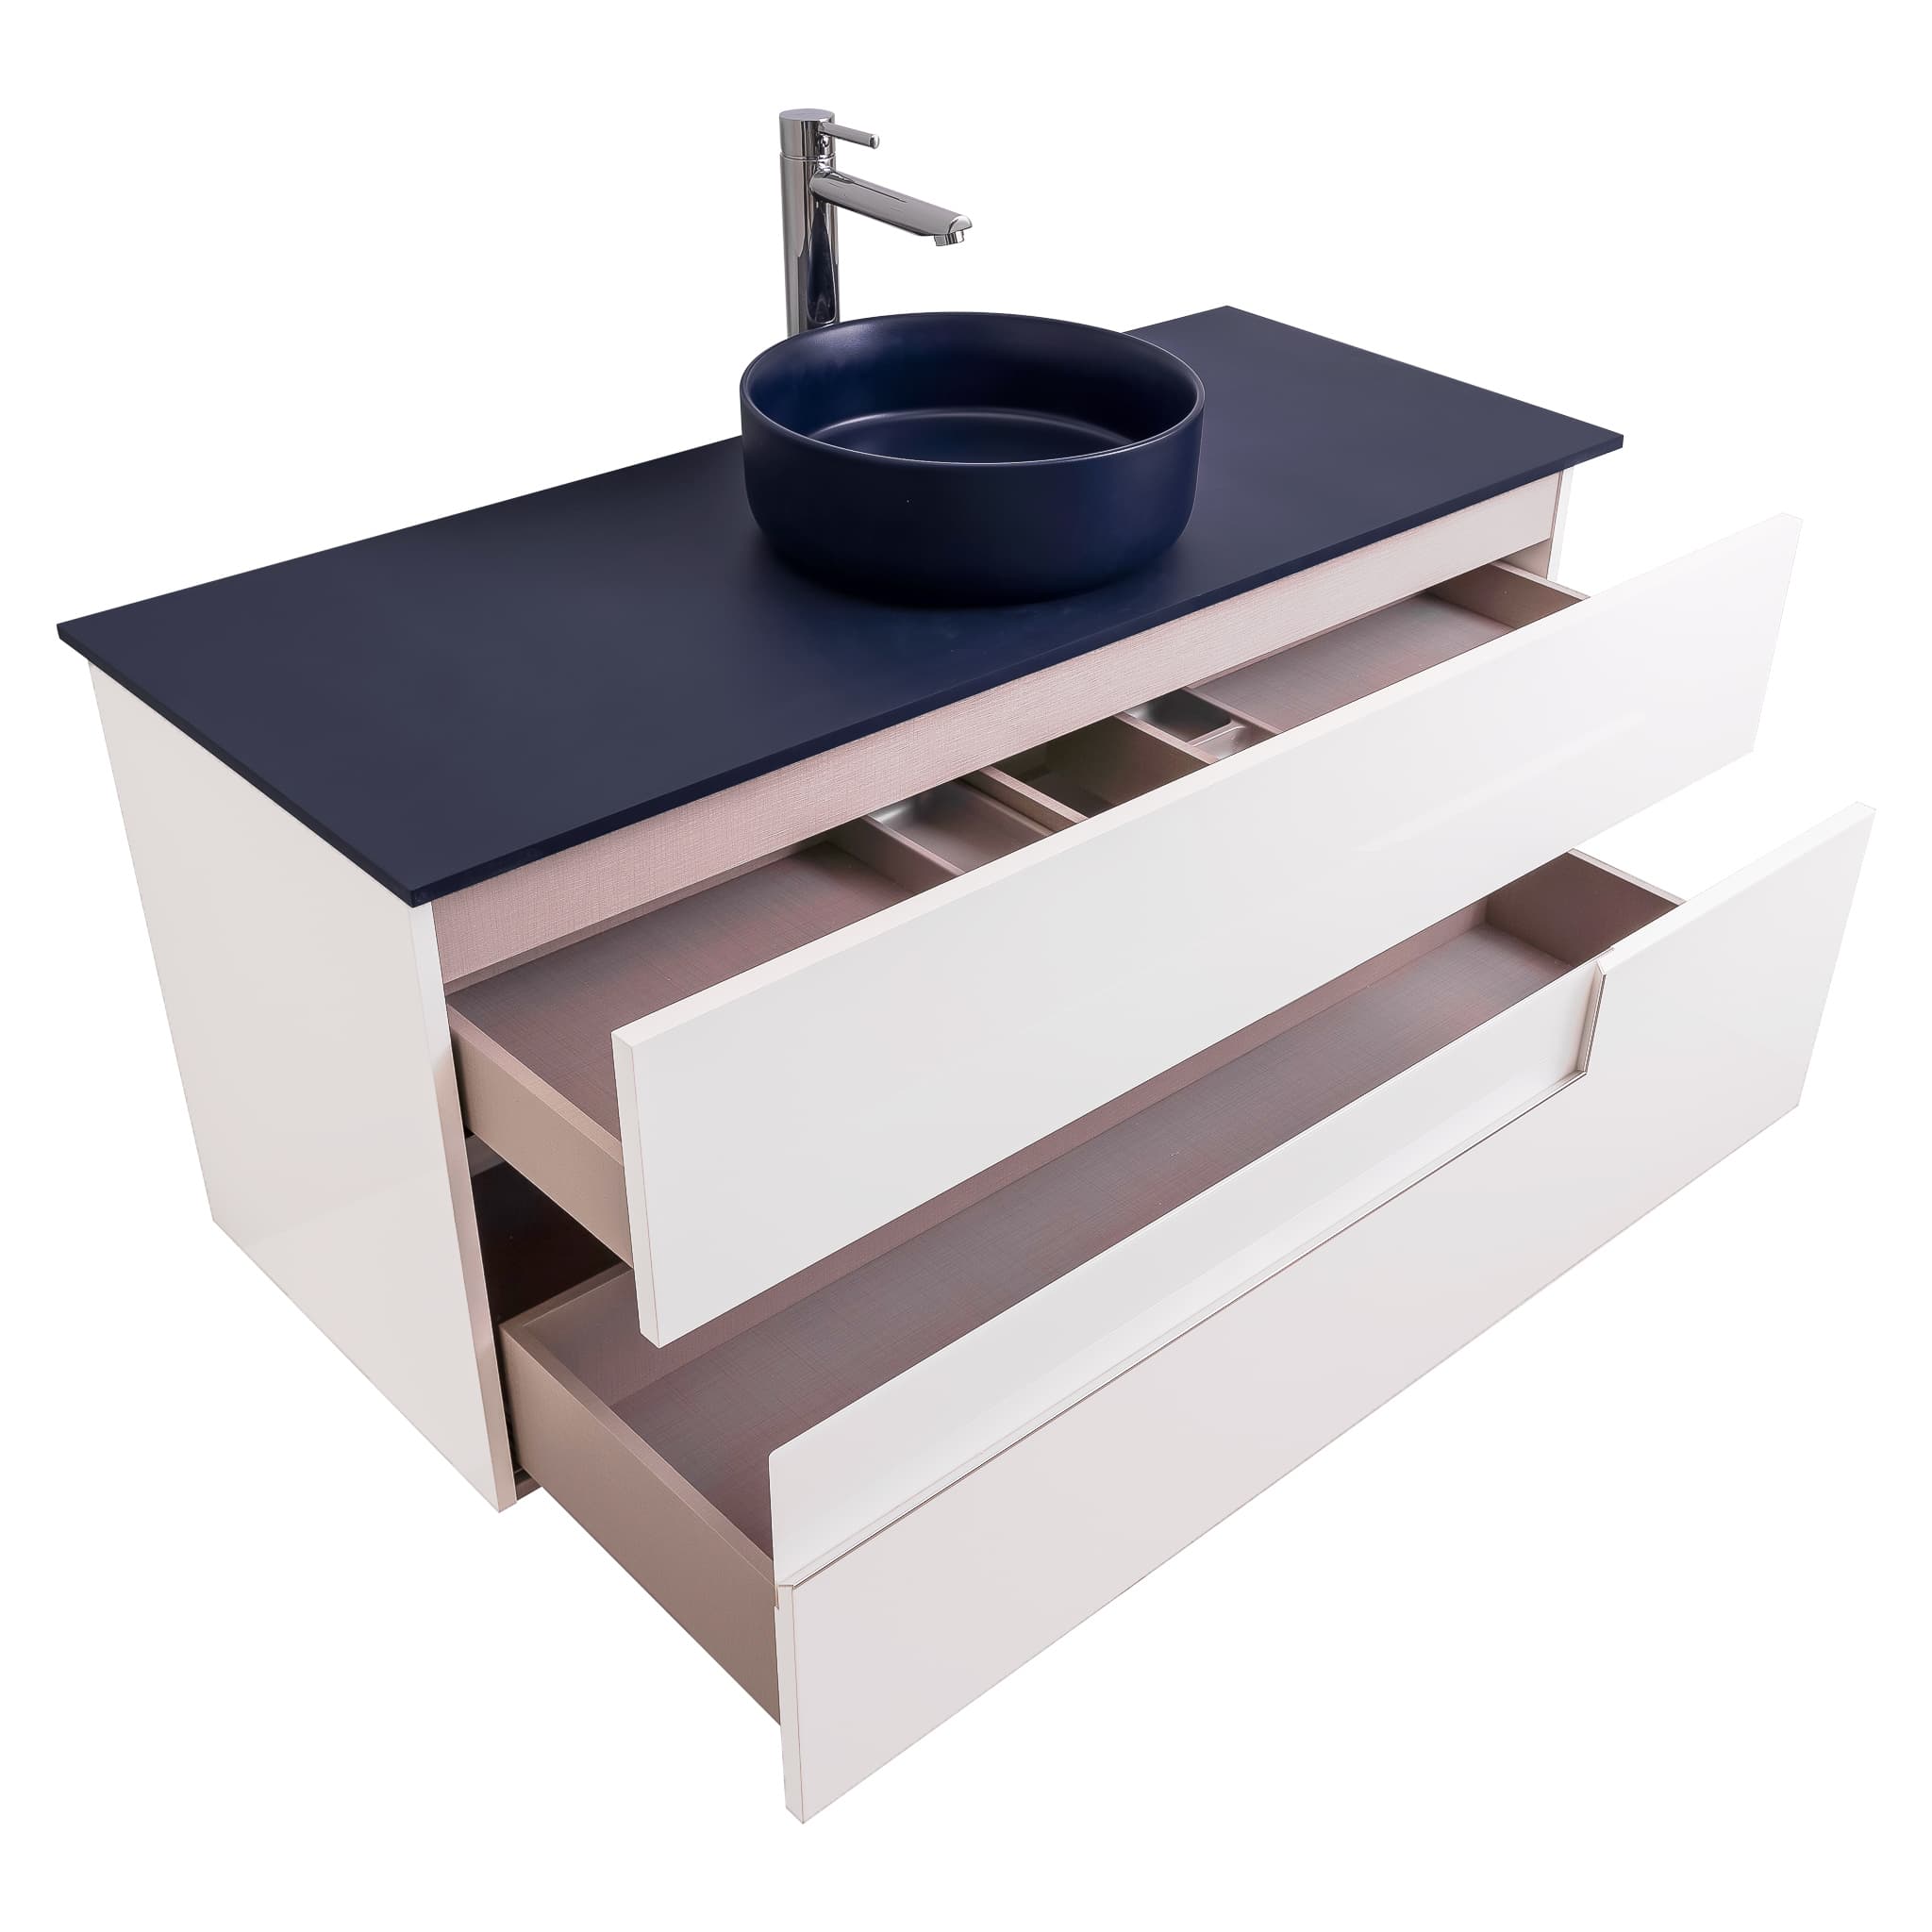 Vision 47.5 White High Gloss Cabinet, Ares Navy Blue Top And Ares Navy Blue Ceramic Basin, Wall Mounted Modern Vanity Set